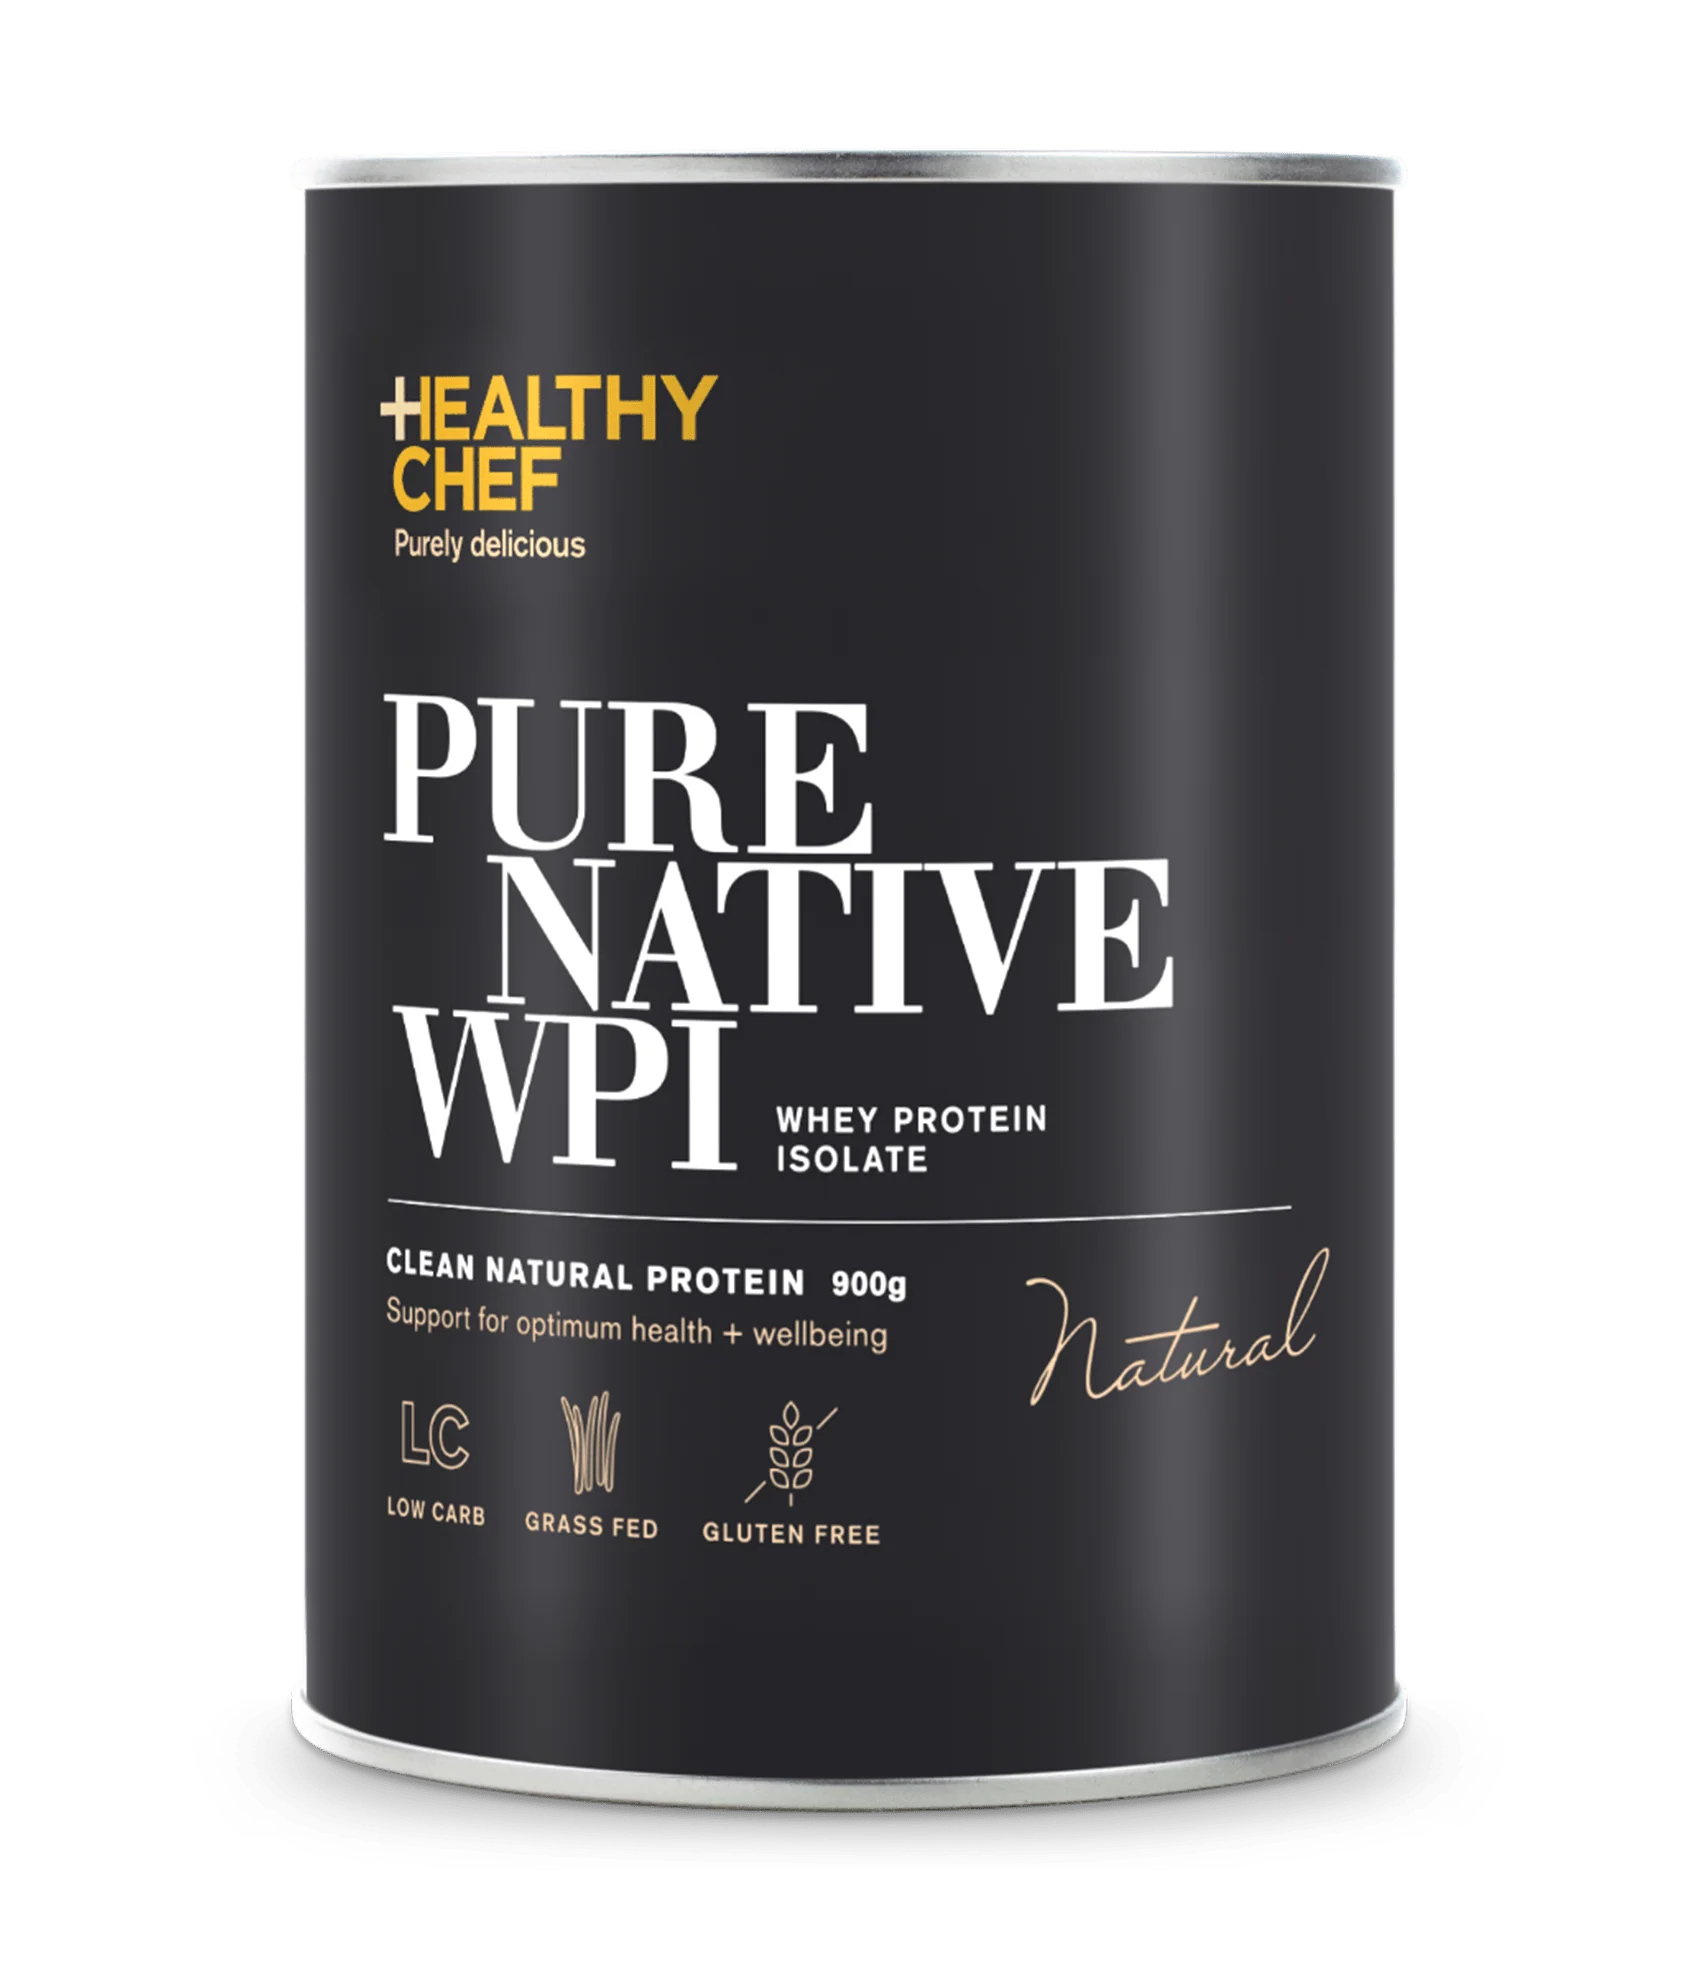 The Healthy Chef Pure Native WPI (Whey Protein Isolate) Natural